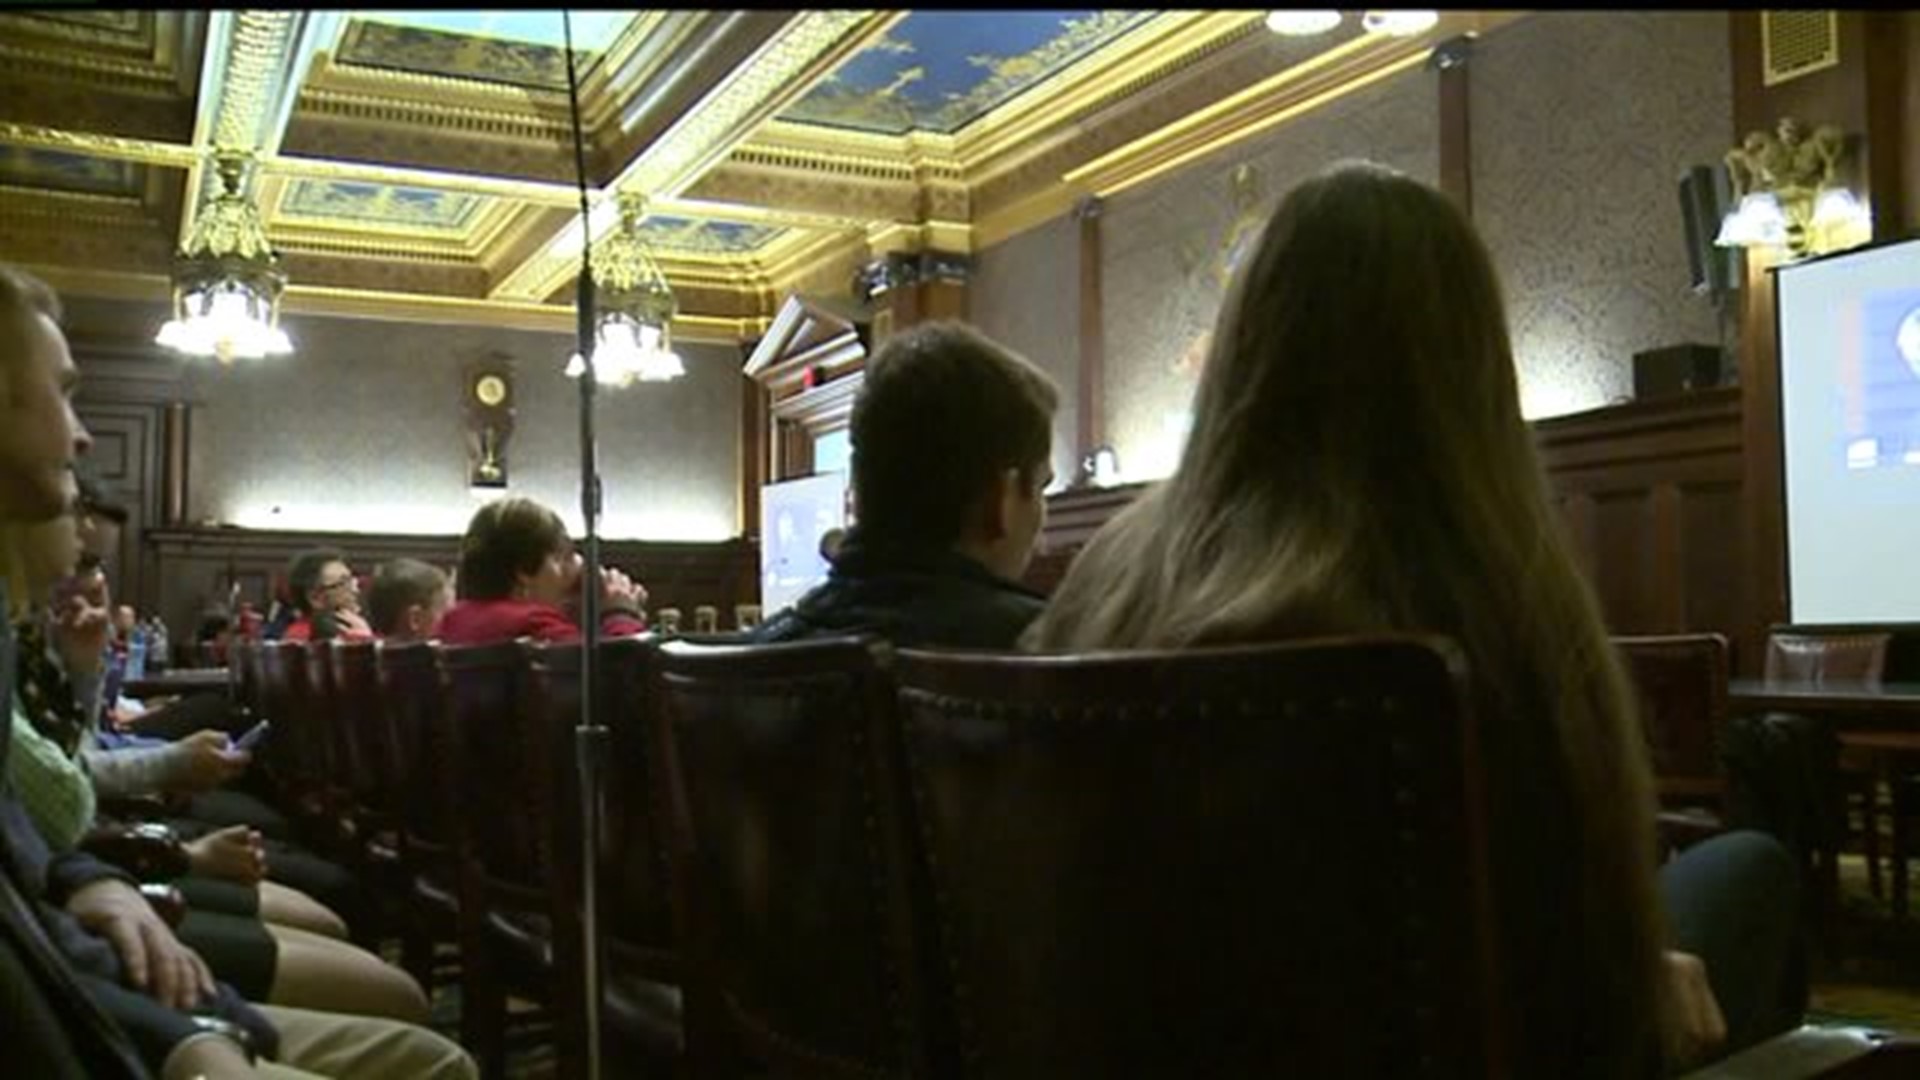 Dauphin County high students gather to watch inauguration ceremony